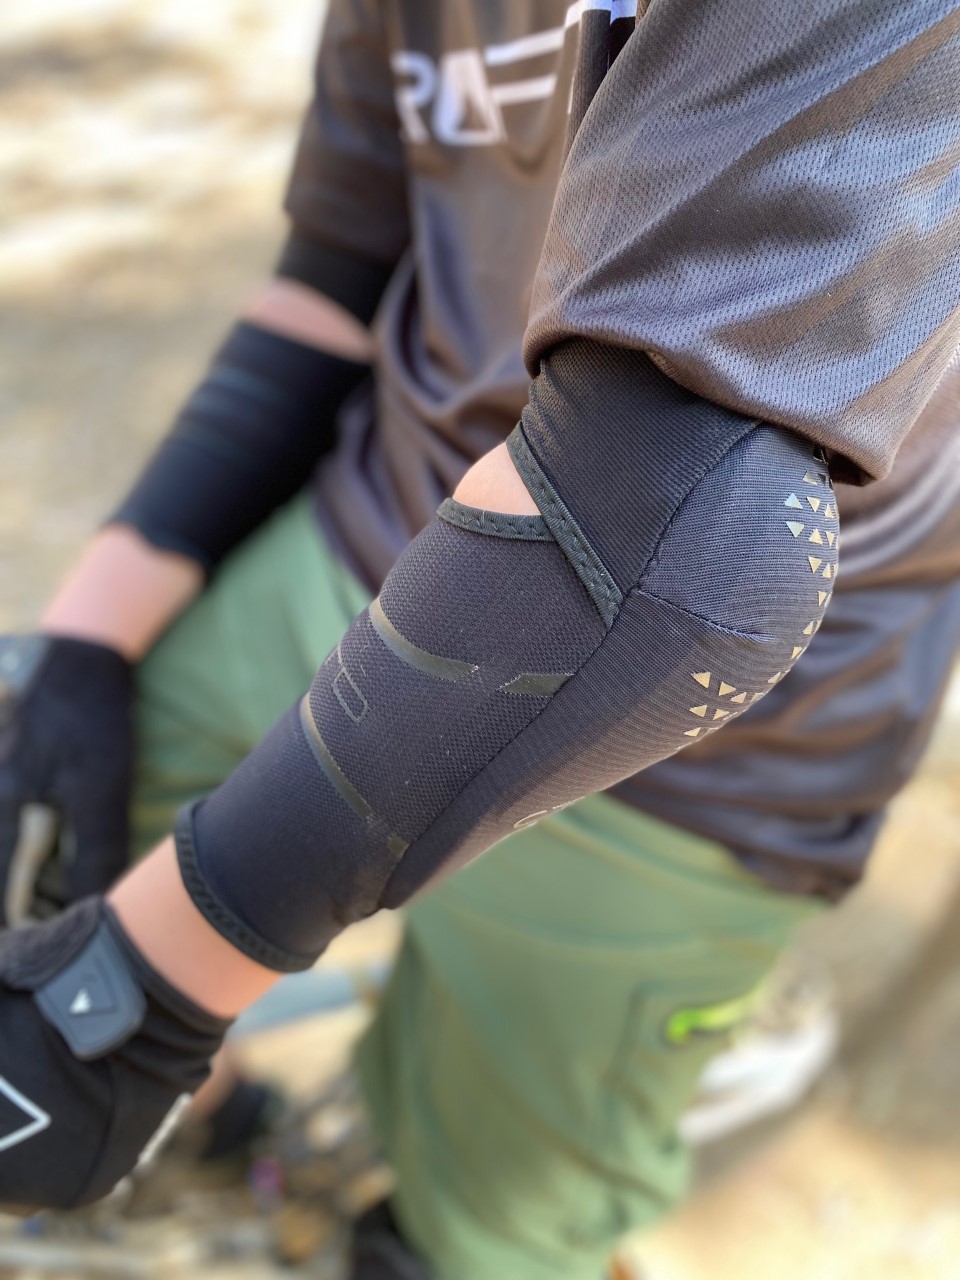 Should you wear Knee & Elbow pads?